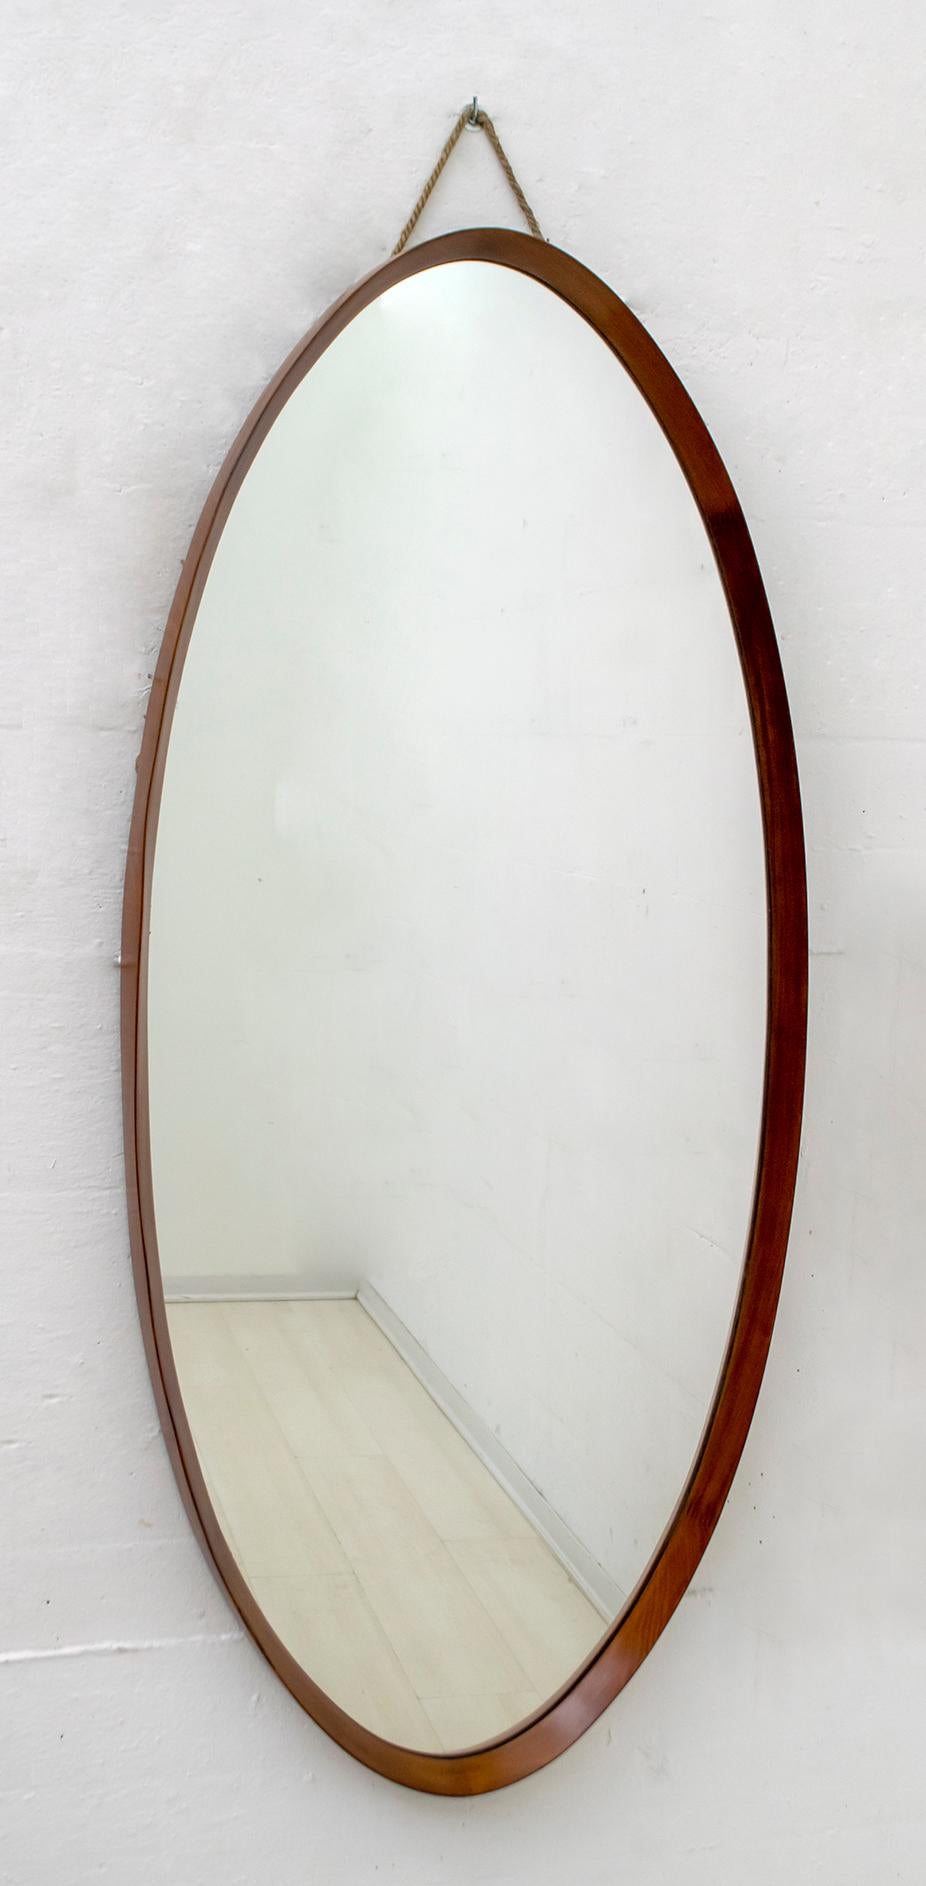 Oval mirror in curved walnut, made in Italy in the 1970s, attributable to Campo e Graffi for Graffi Home.
The frame has been polished.